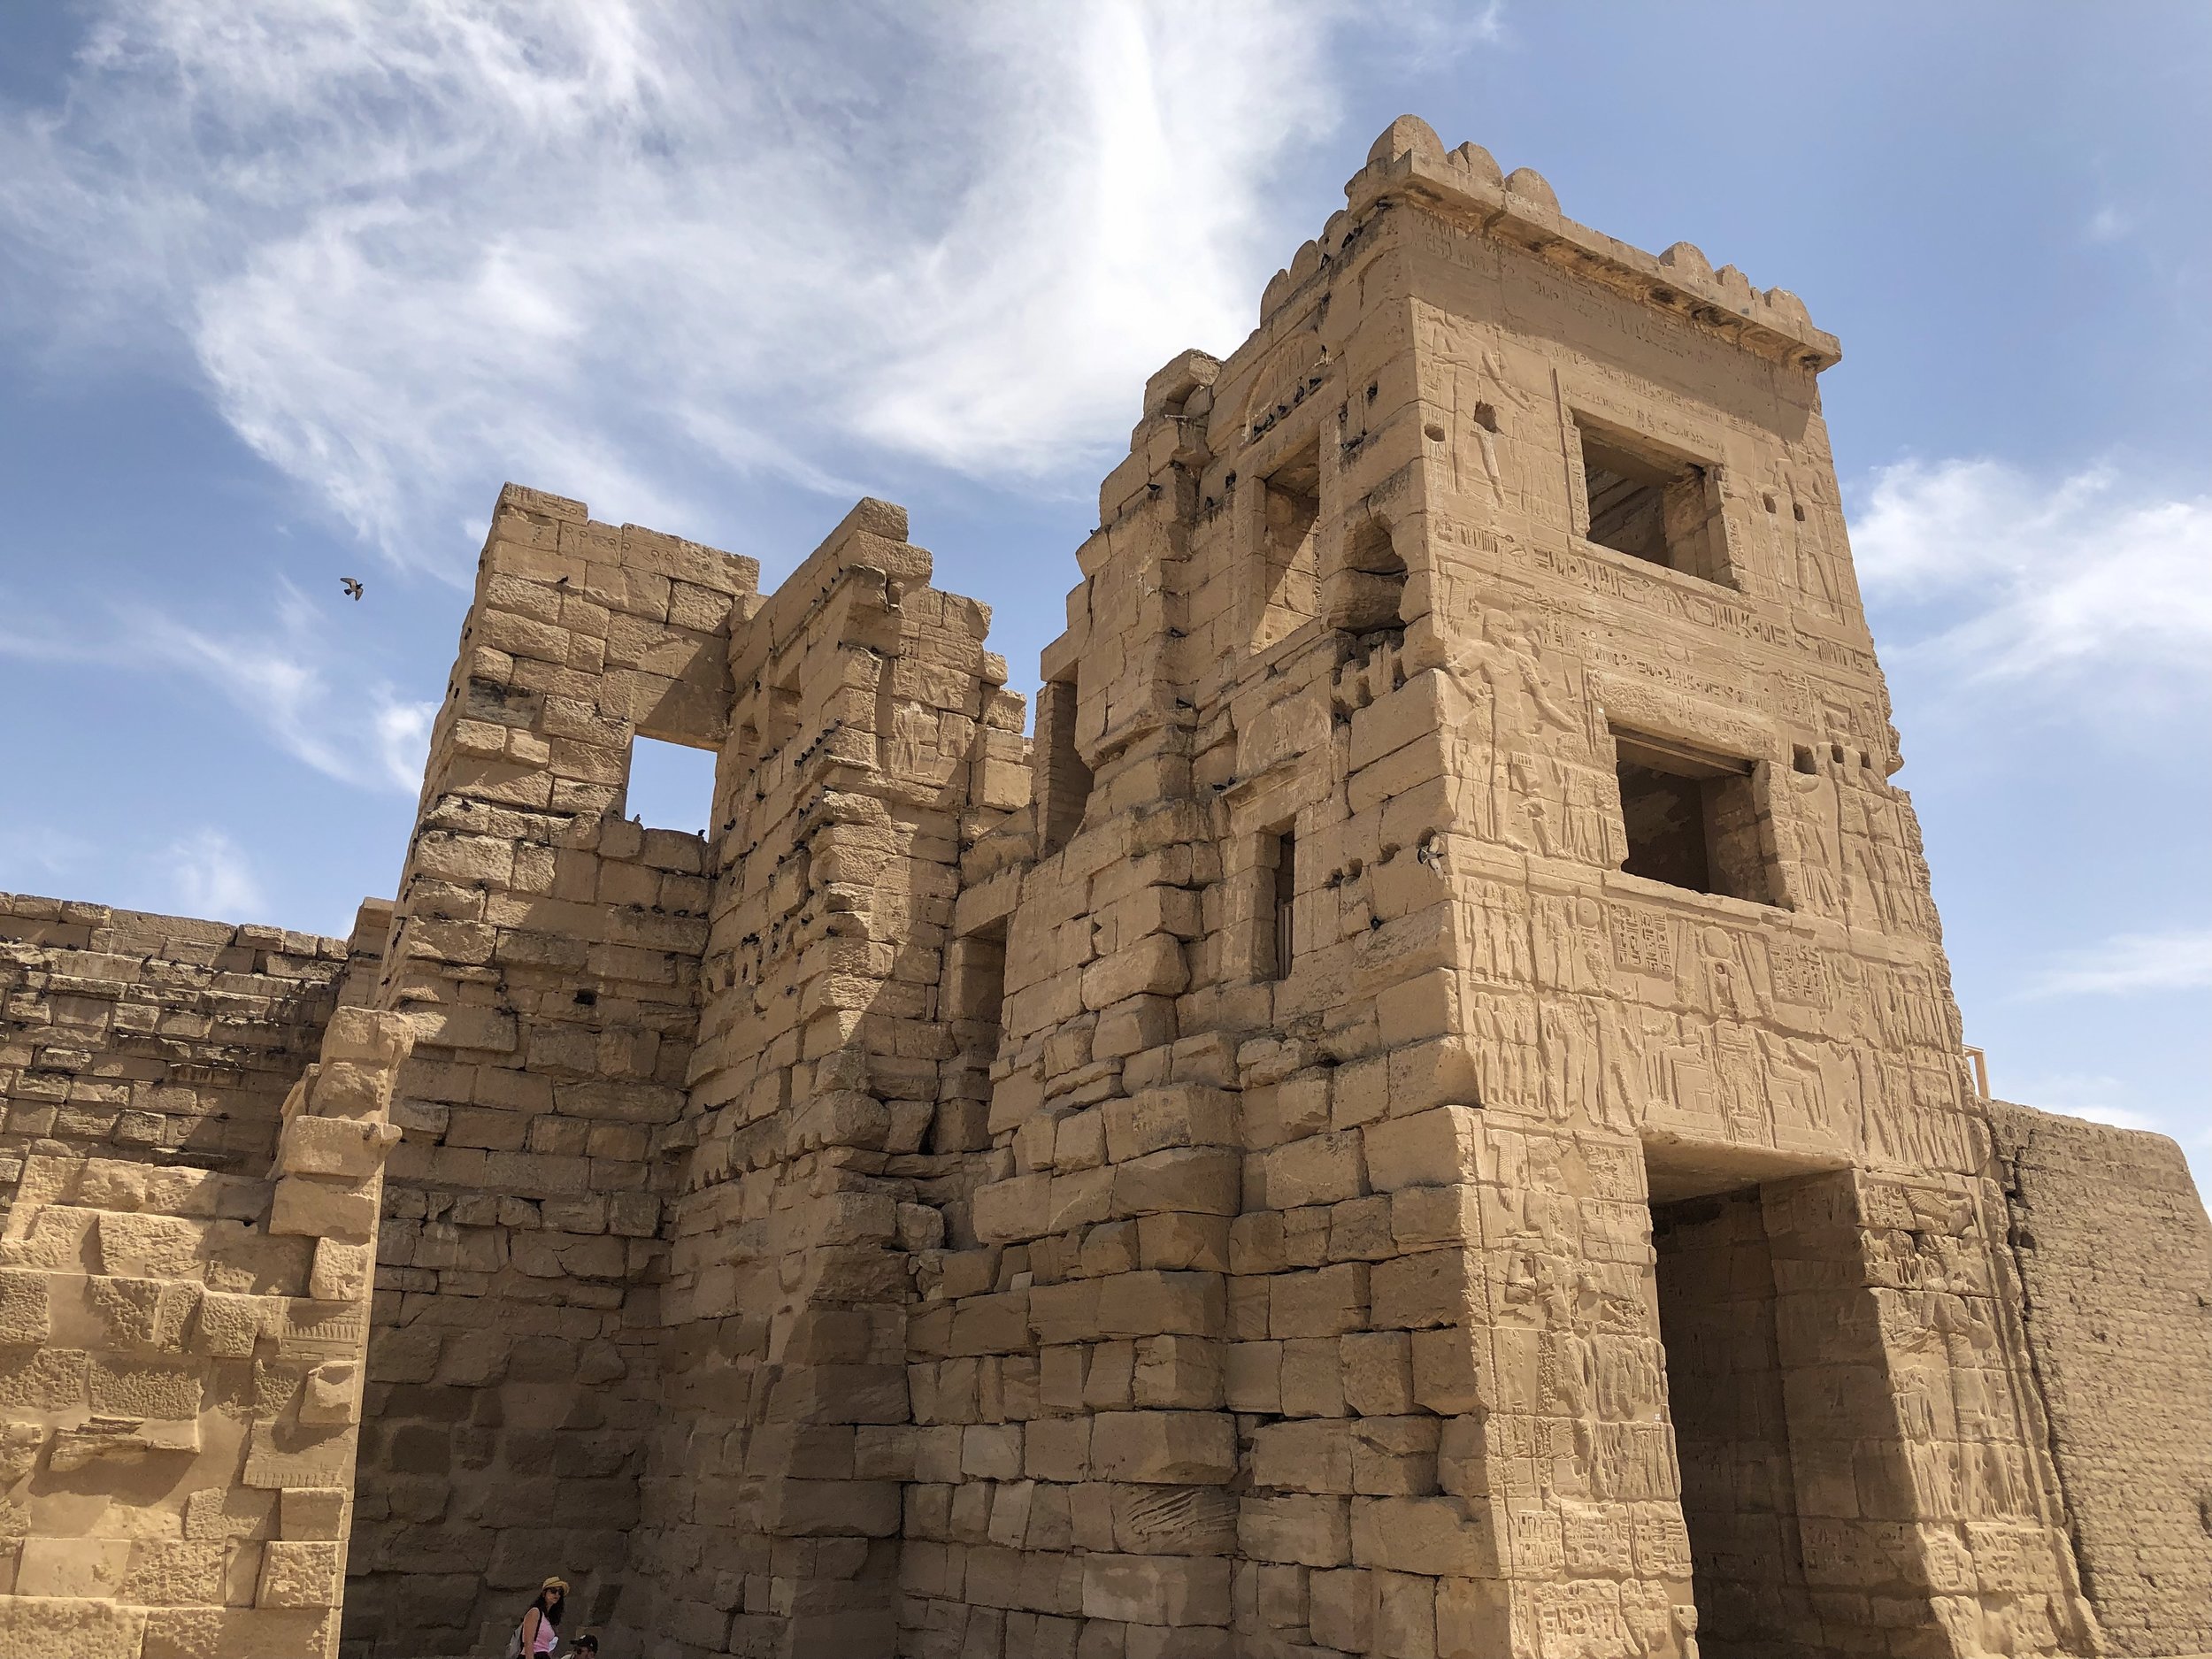 It was in these rooms at the top of the structure where Ramesses III hung out with his many wives — and where he met his demise